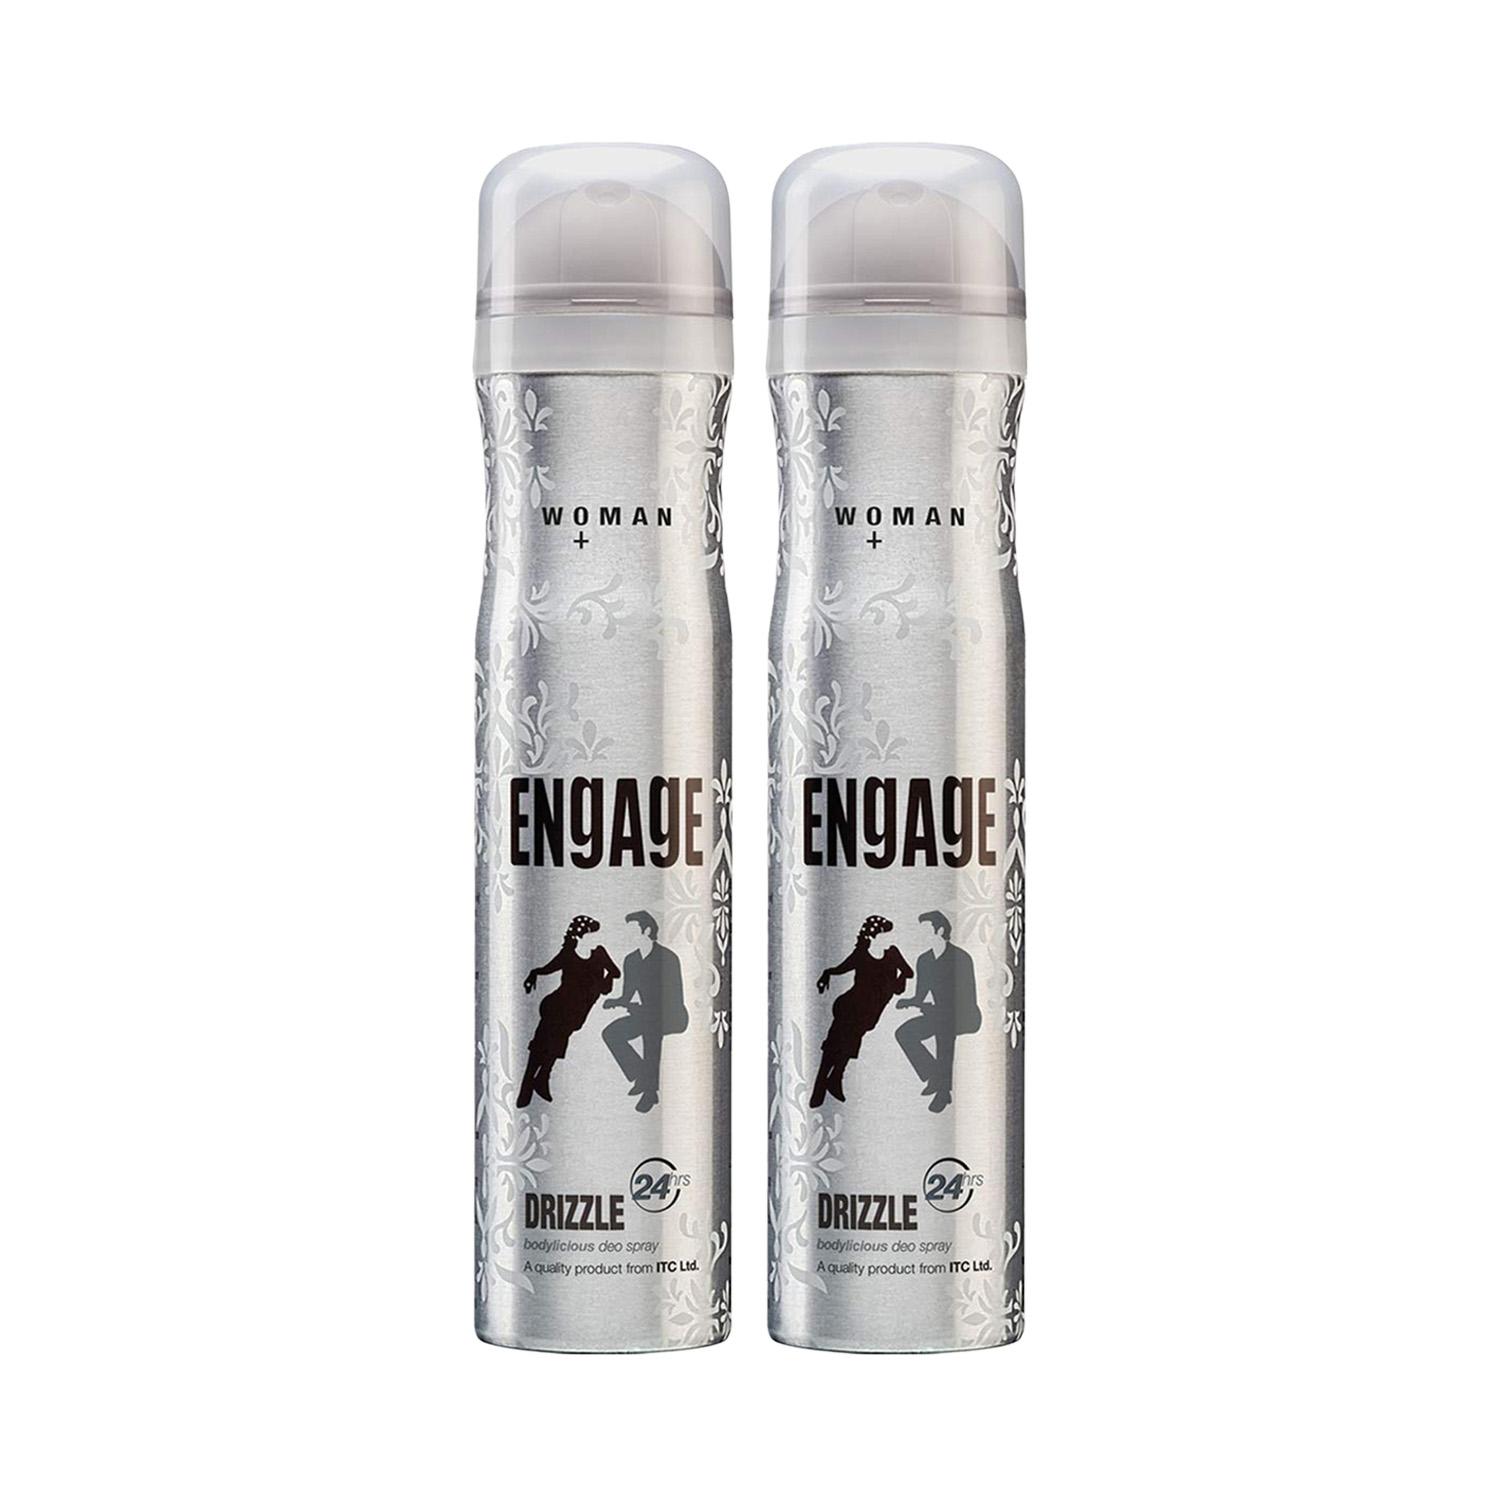 Engage Drizzle Deodorant Spray For Women (150 ml) (Pack of 2) Combo